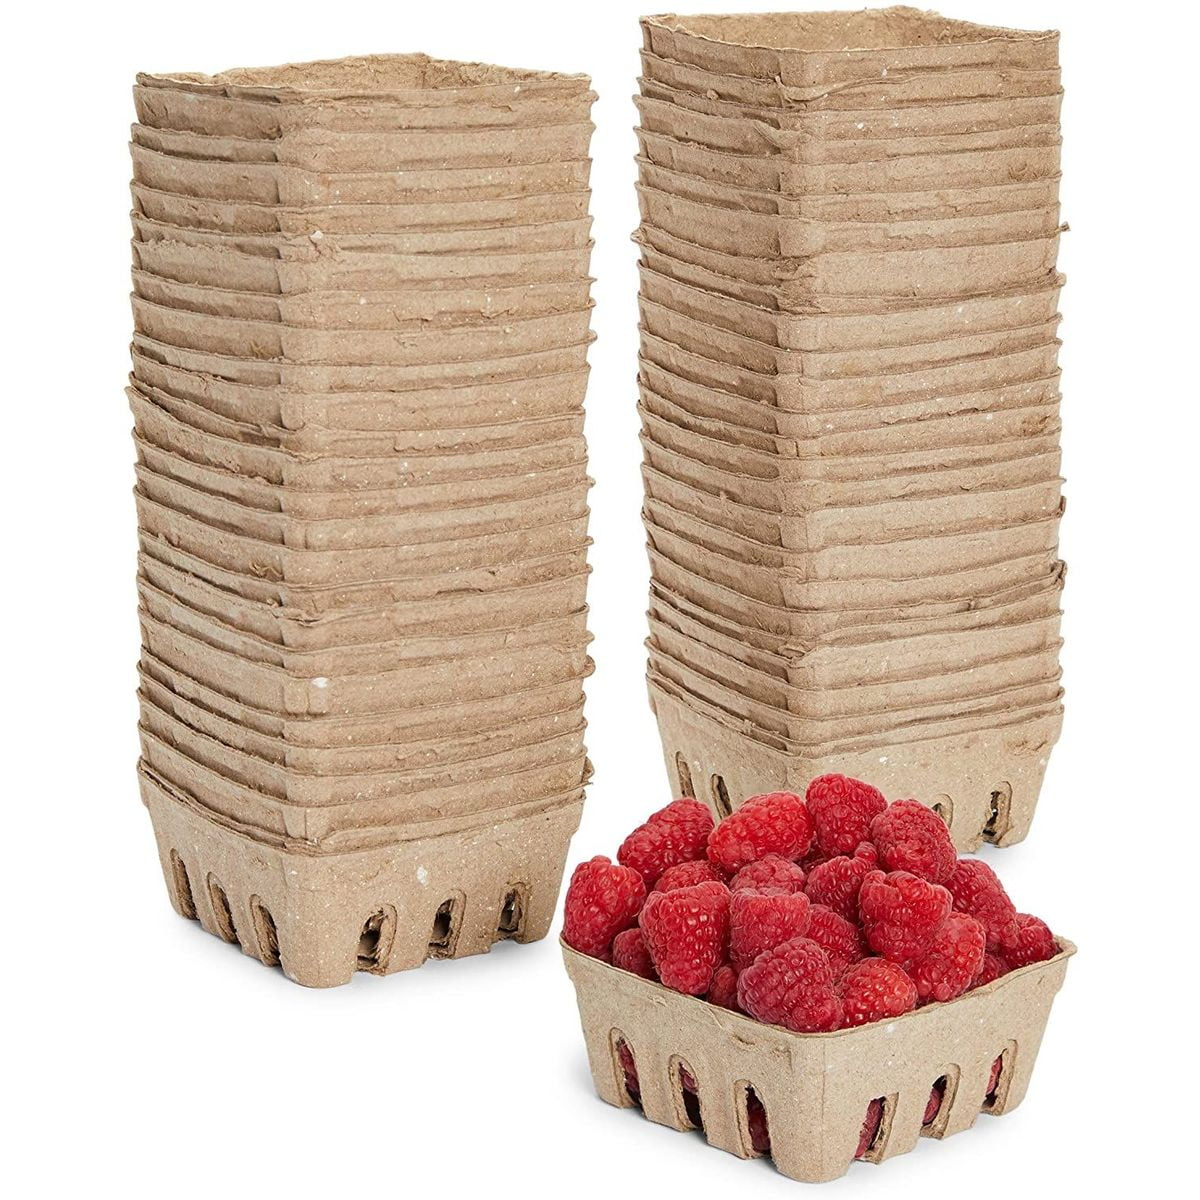 Plastic Berry 15 Pieces Produce 1 Pint Basket Container by MT Products 